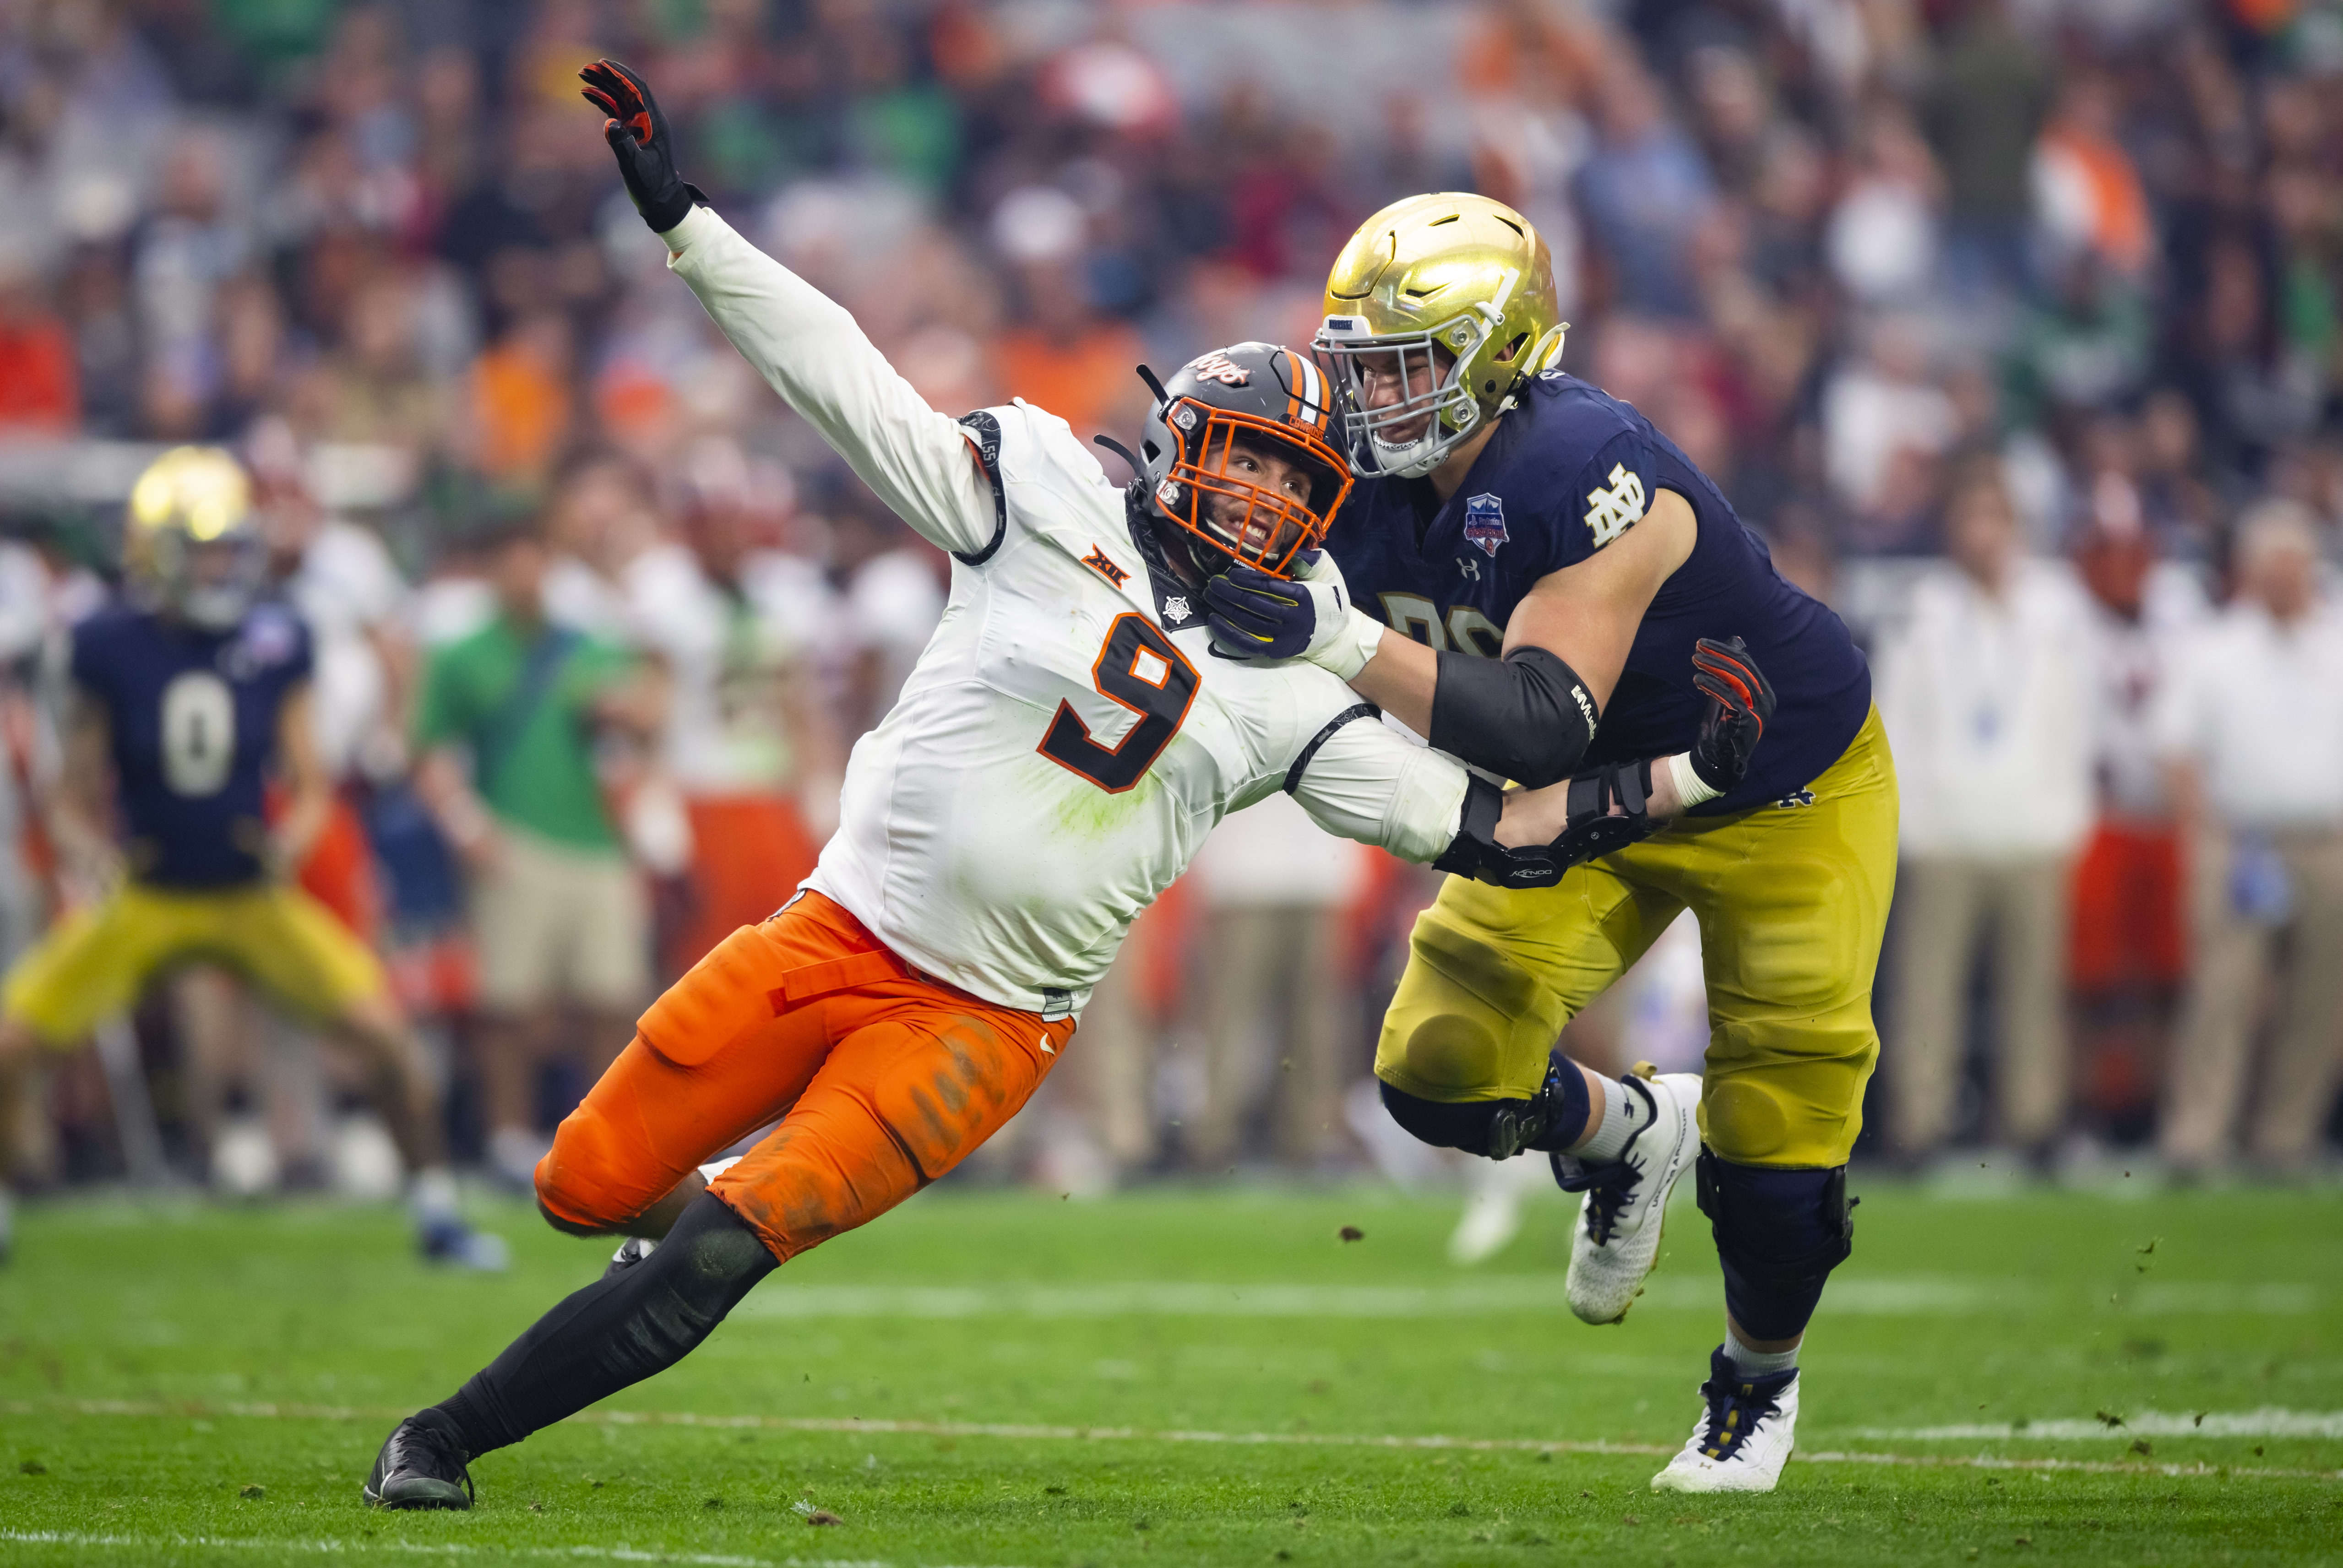 Notre Dame Fighting Irish offensive lineman Joe Alt (76) (New York Giants Prospect) defends against Oklahoma State Cowboys defensive end Brock Martin (9) in the 2022 Fiesta Bowl at State Farm Stadium